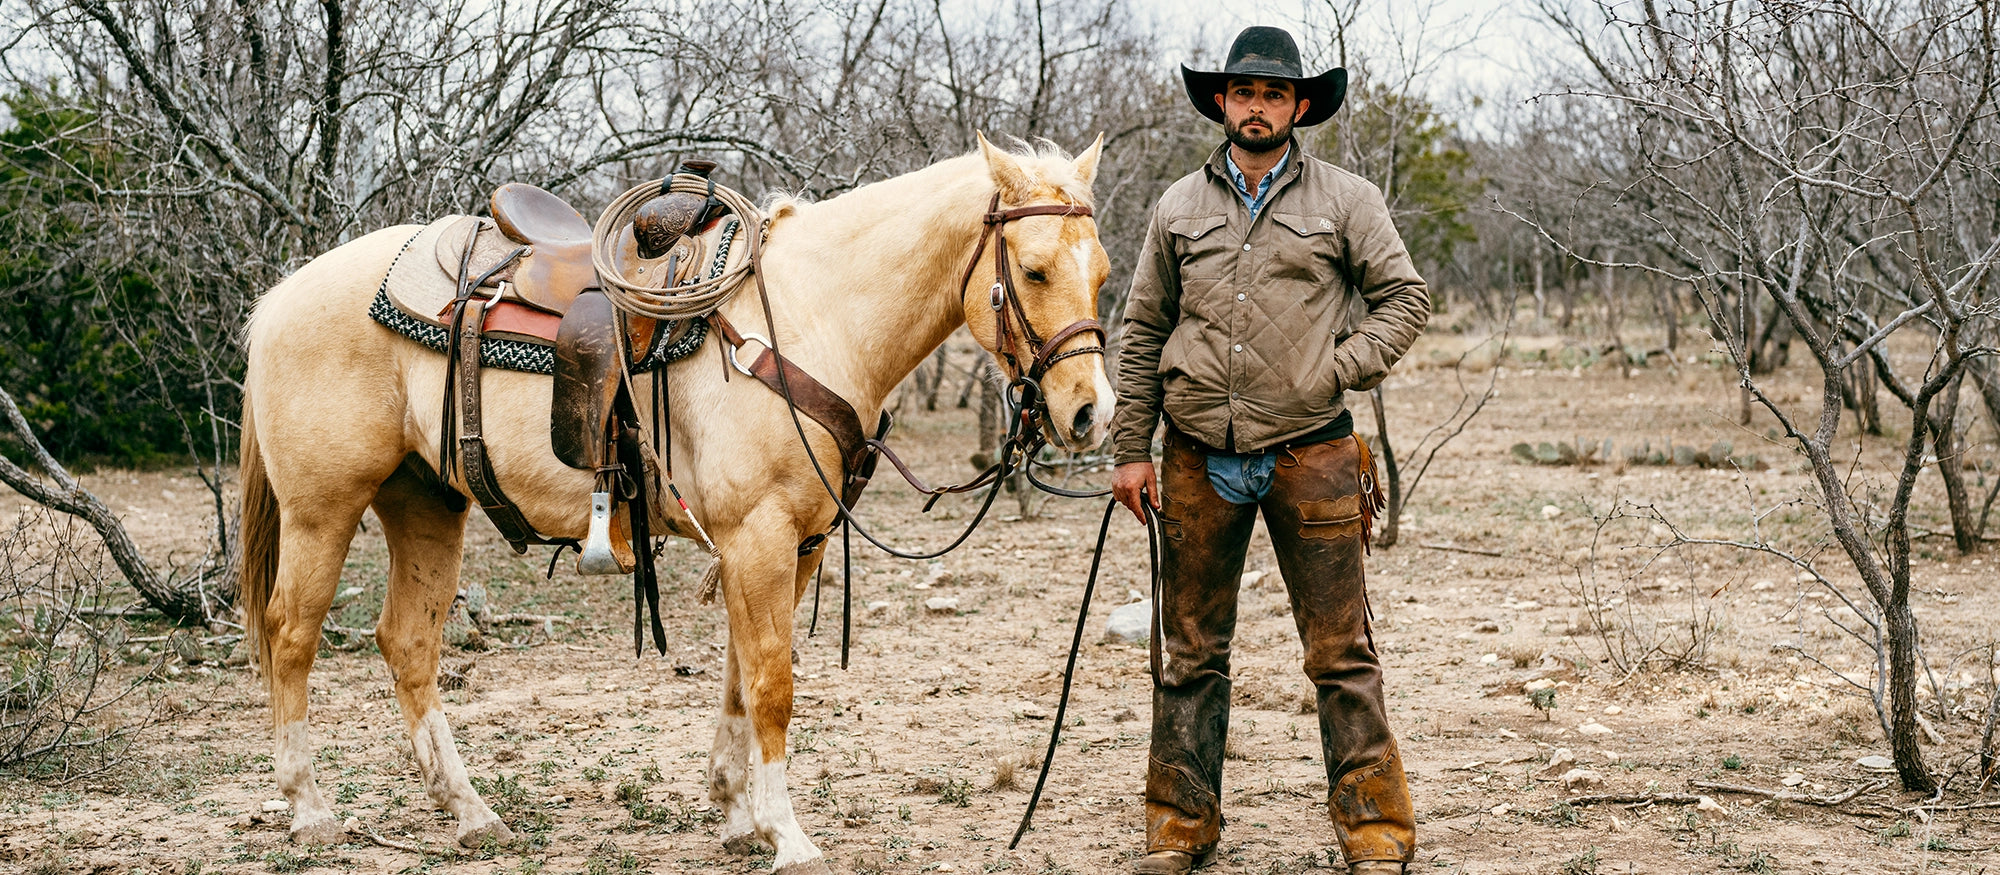 Dillinger waxed cotton field jacket on a ranch with horse and cowboy ranch jacket